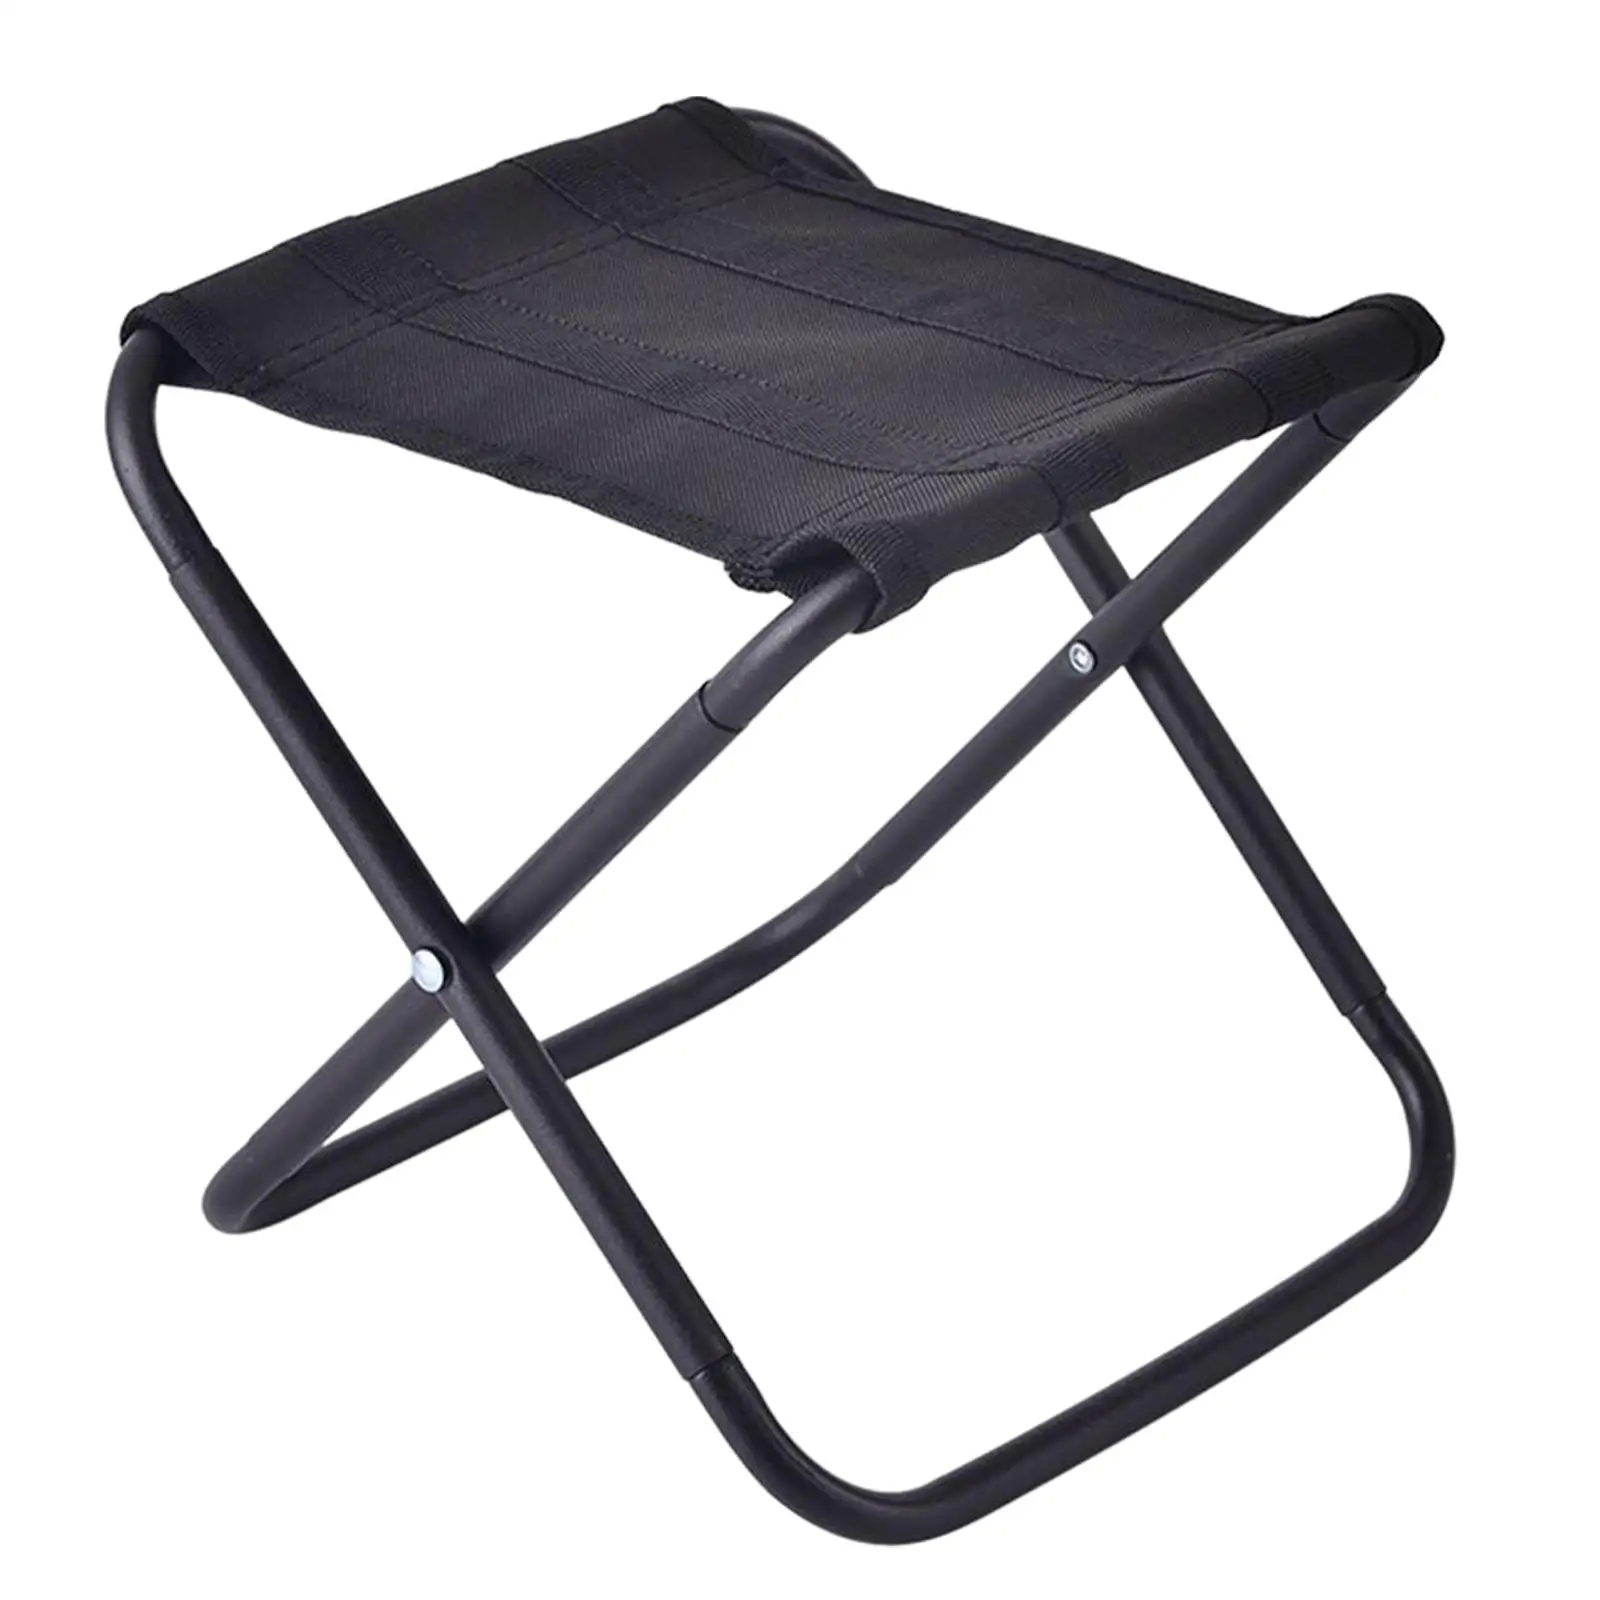 Folding Stools Lightweight Aluminum Alloy Seat for Backpacking Fishing Patio